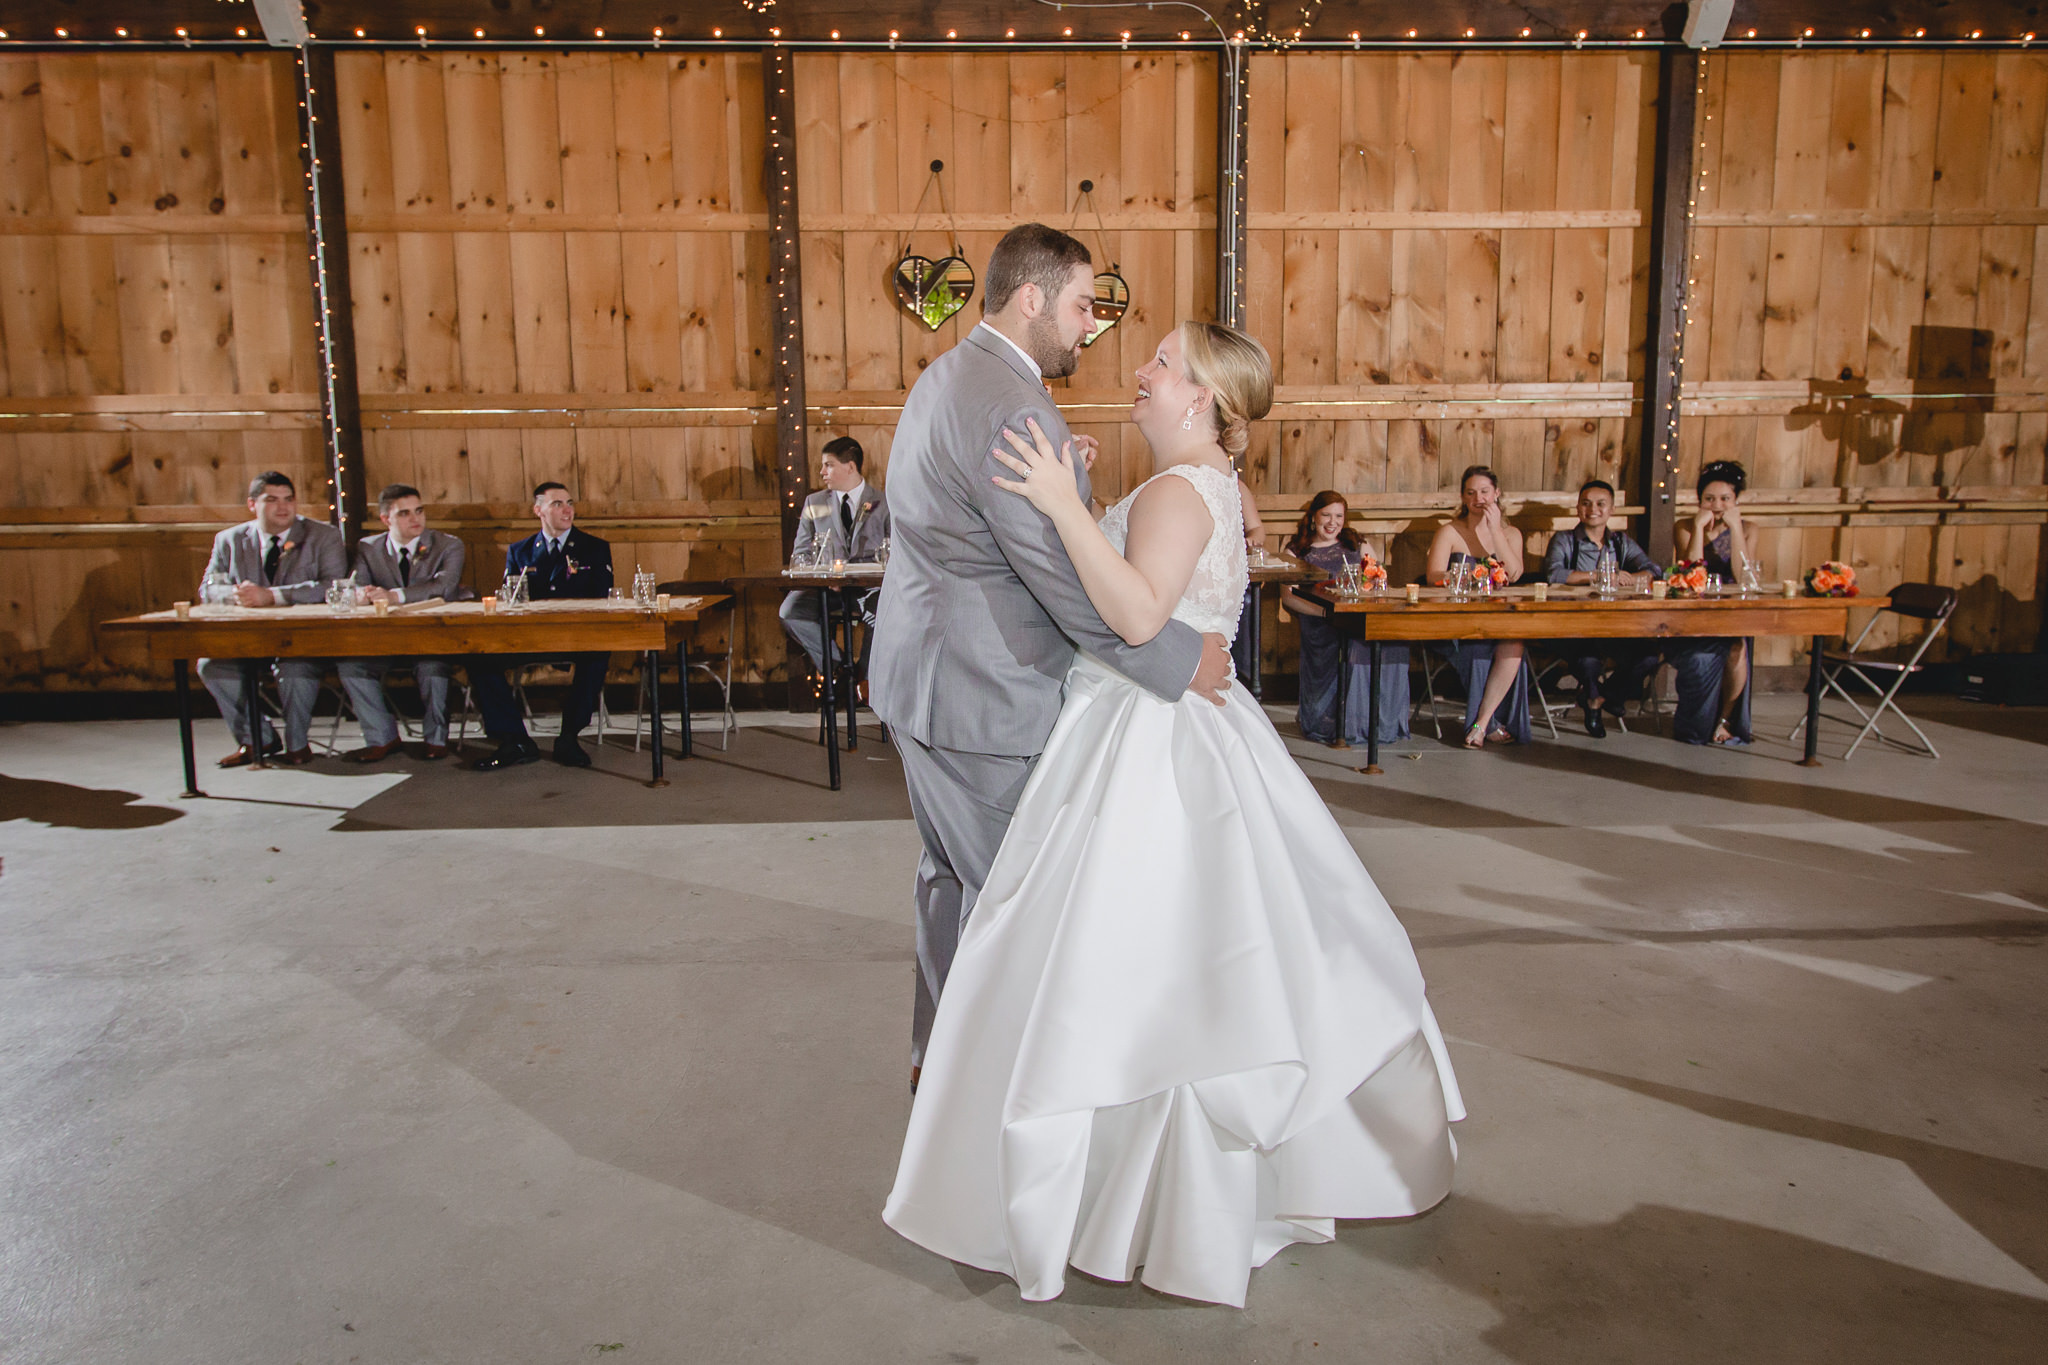 Newlyweds share their first dance at their Barn at Soergel Hollow wedding reception